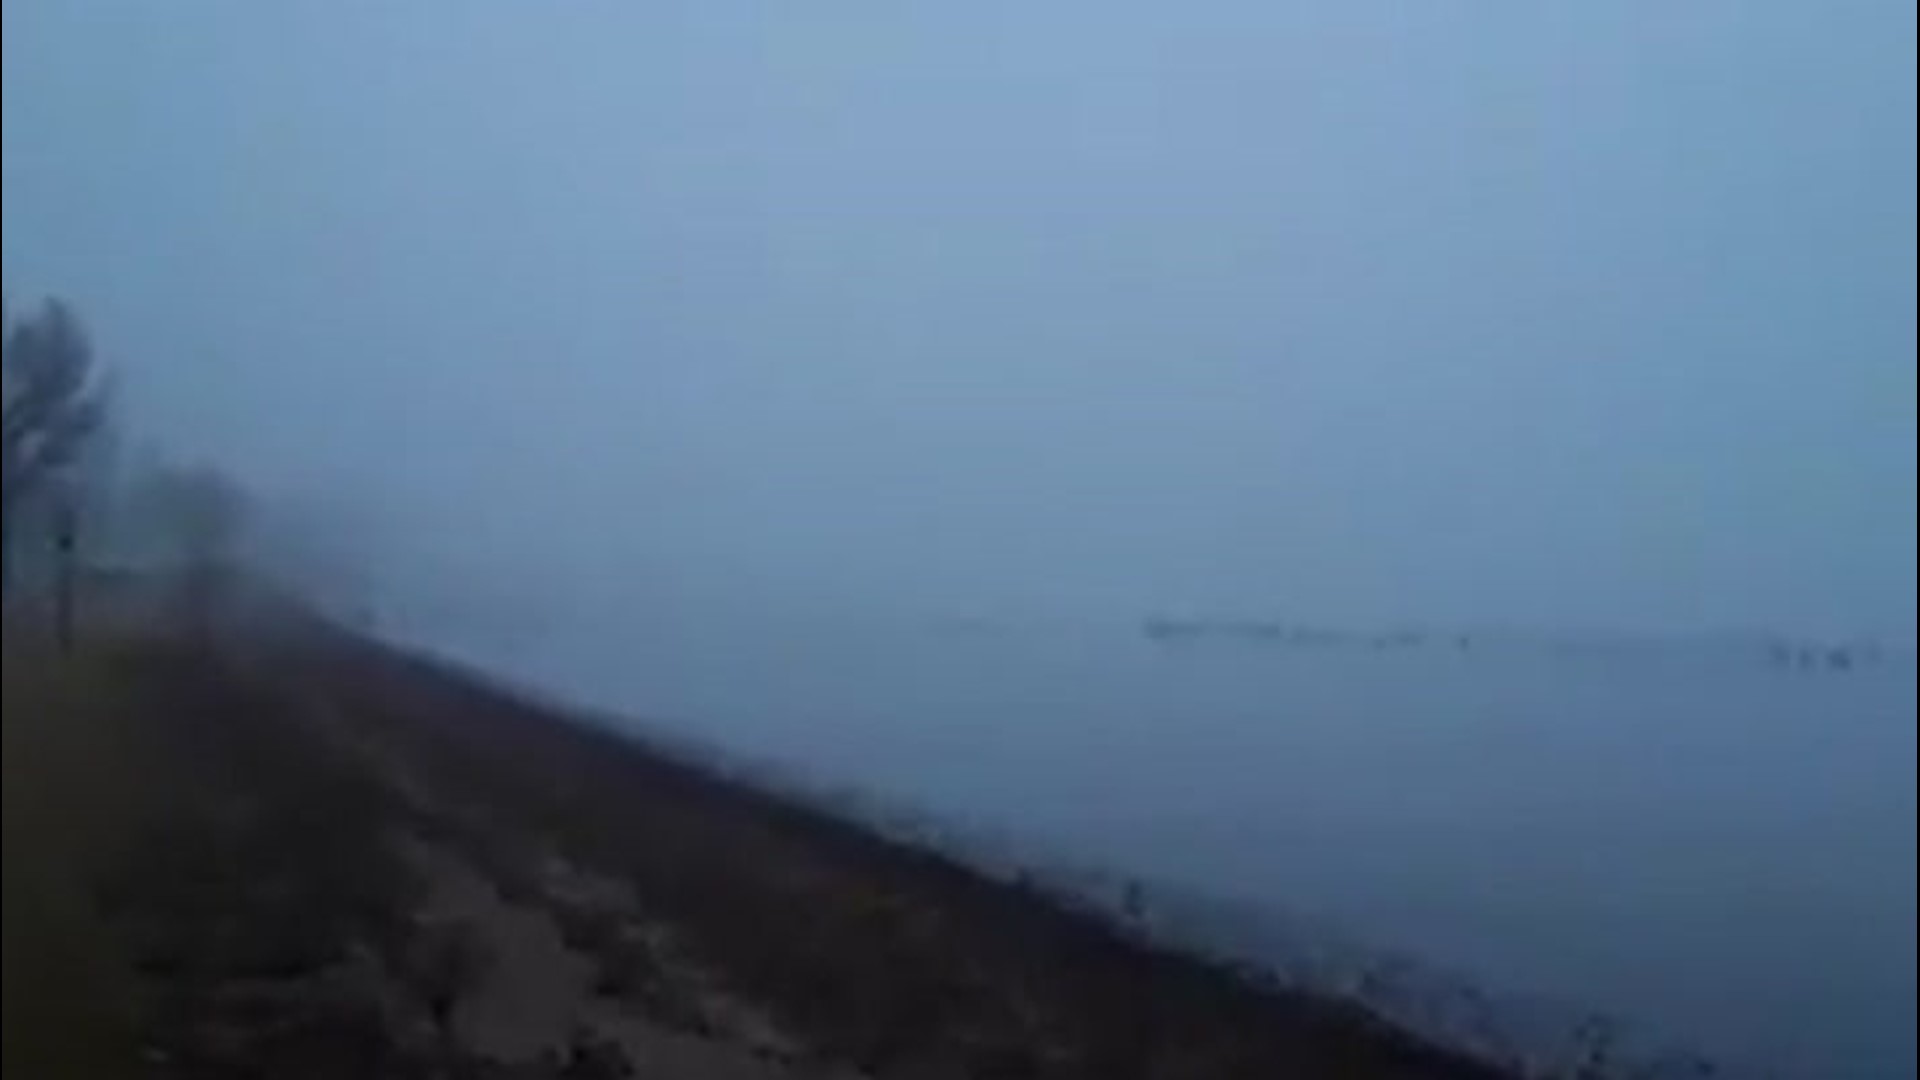 A large flock of geese floated on Lake Ripley in Litchfield, Minnesota, in thick fog on Nov. 24, the week of Thanksgiving.